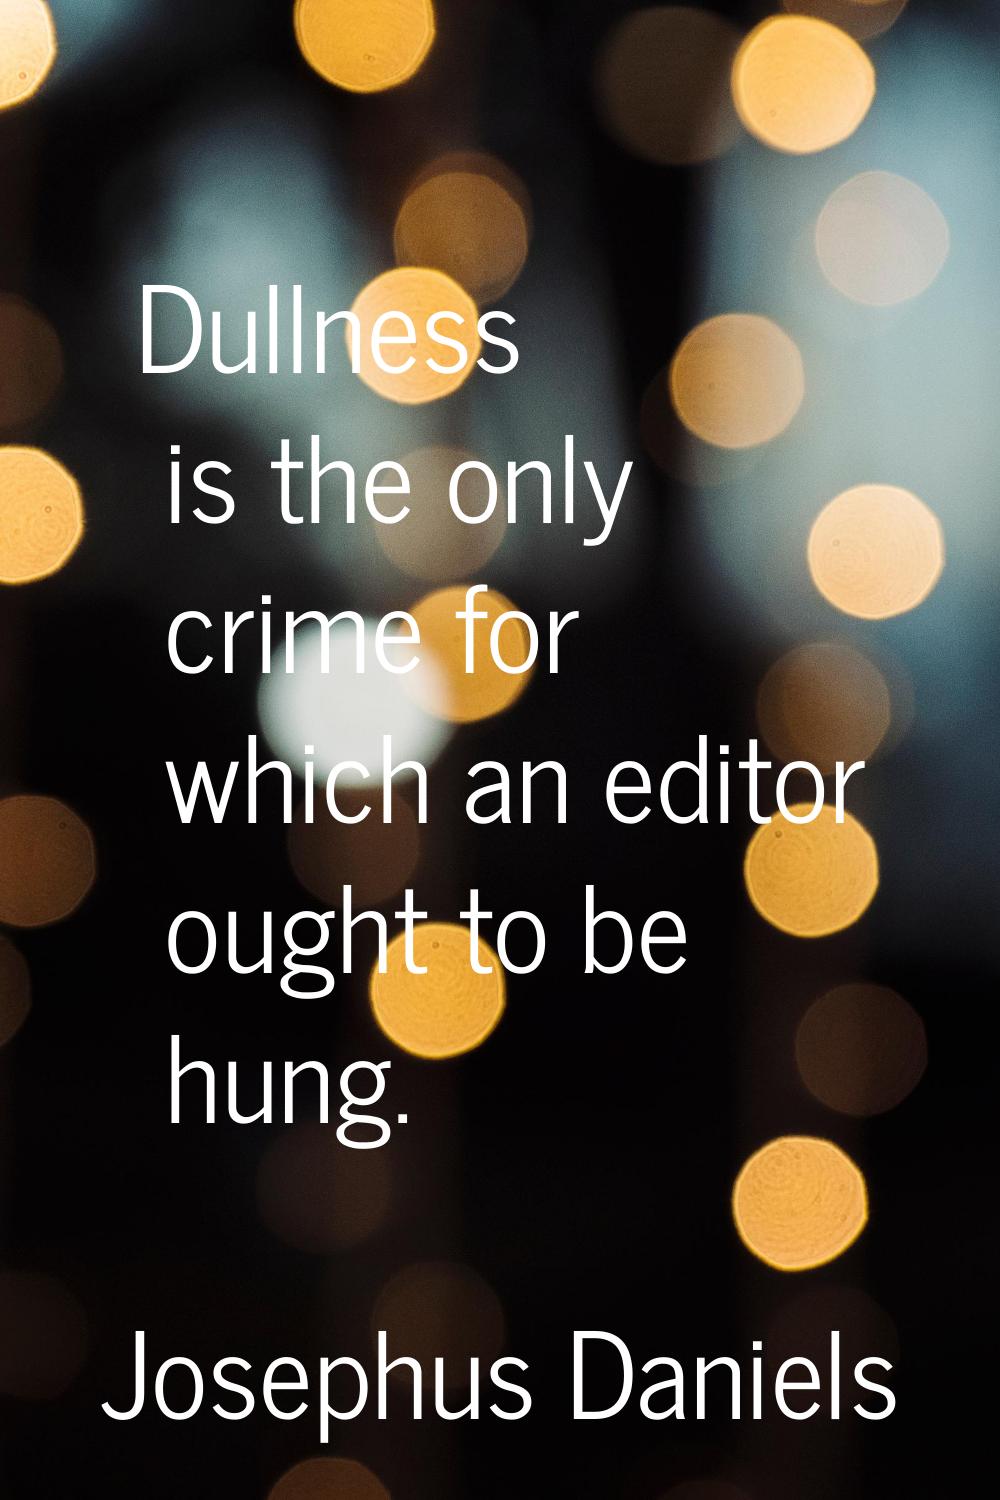 Dullness is the only crime for which an editor ought to be hung.